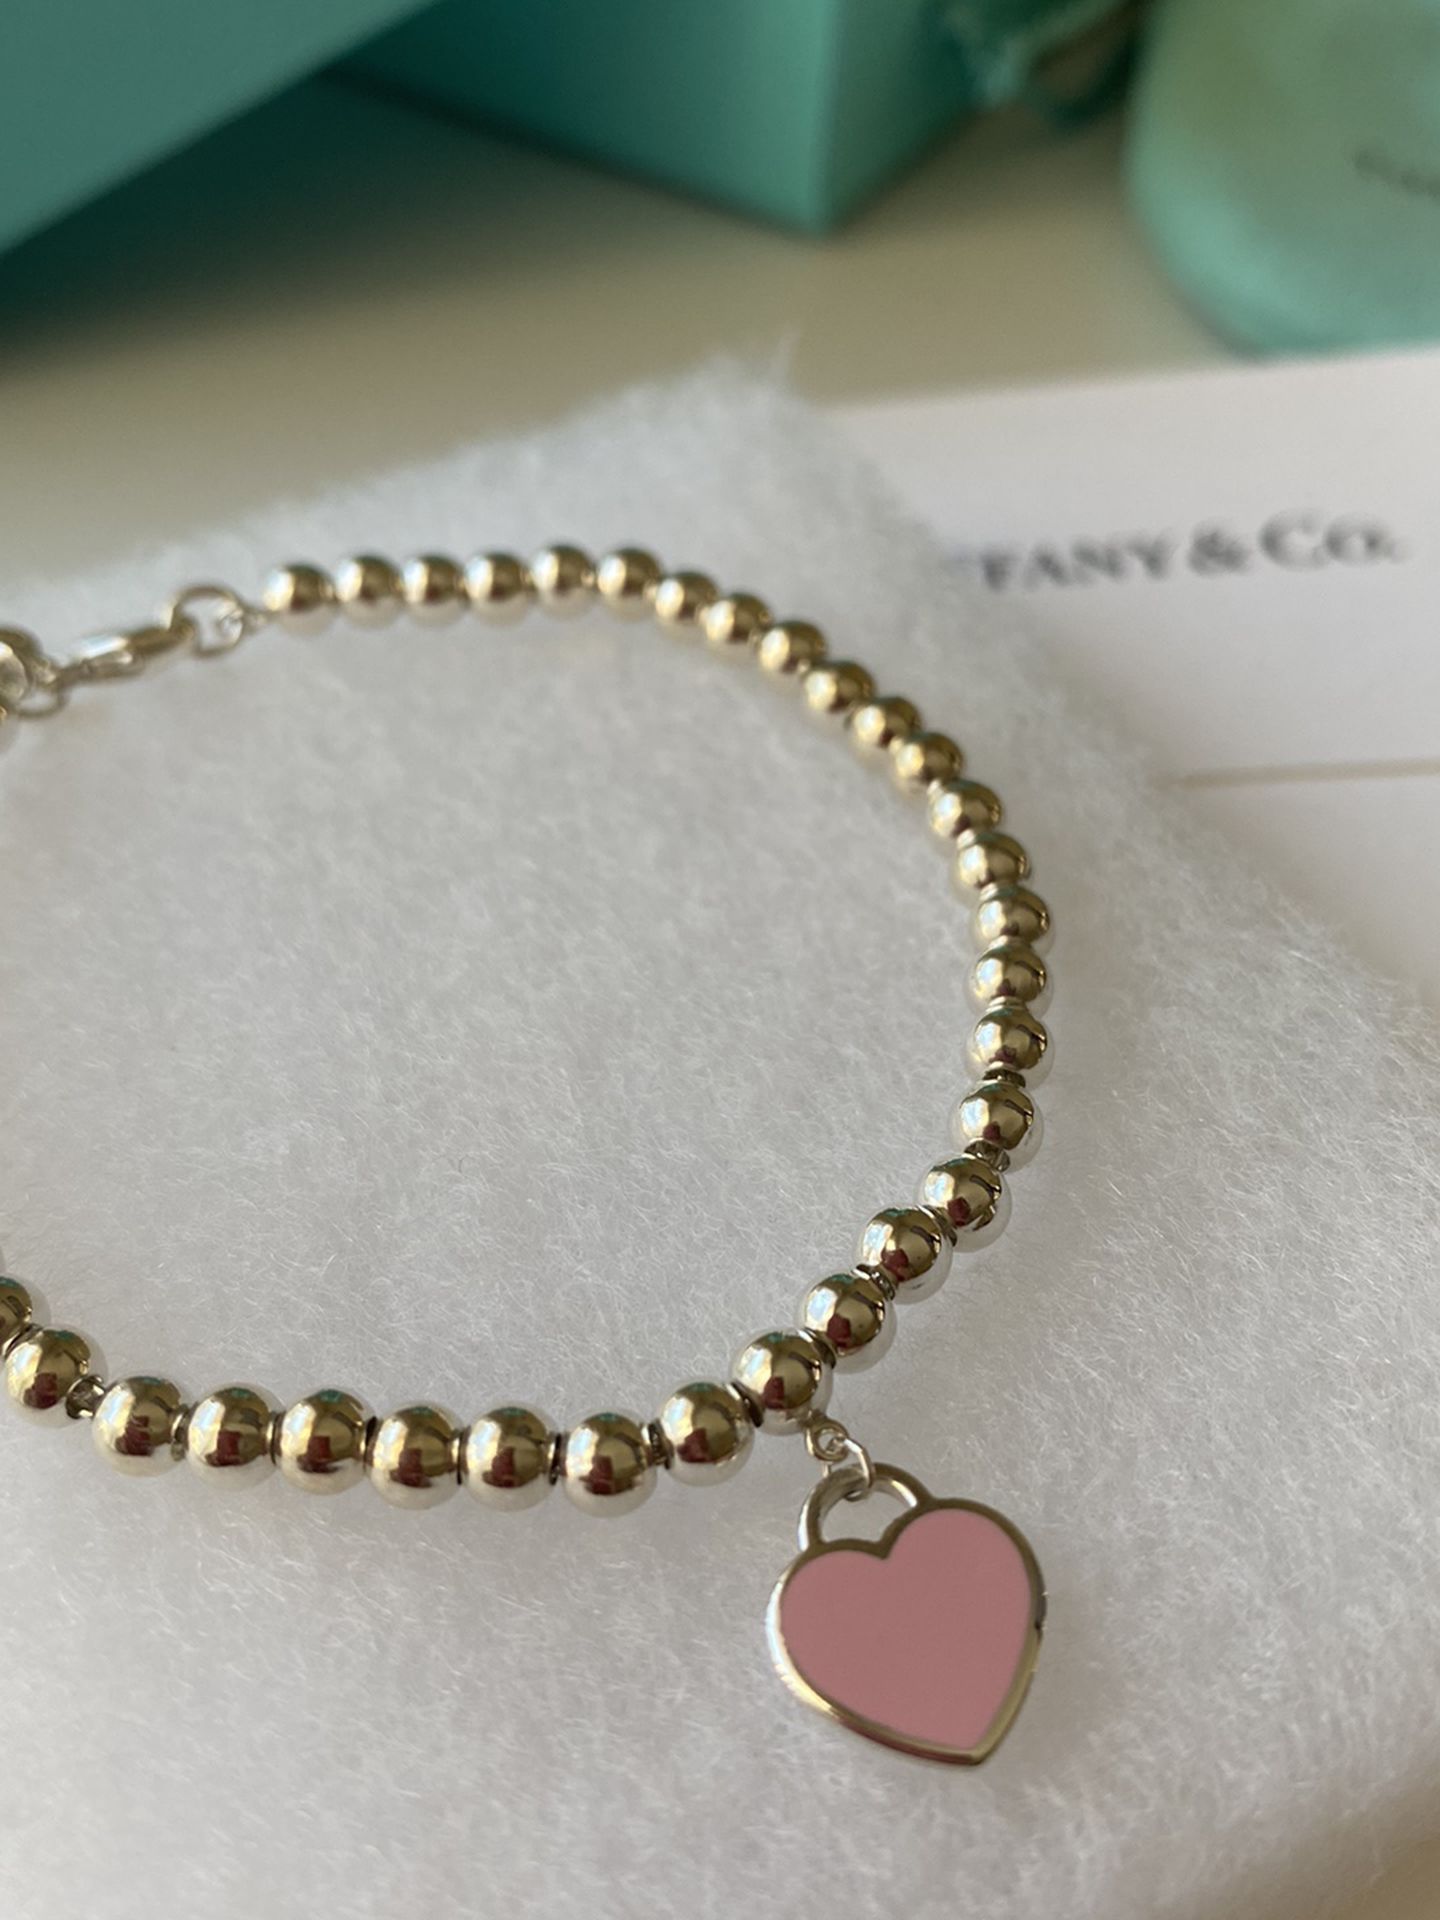 BRAND NEW Authentic Tiffany Pink Heart Tag Bead Bracelet